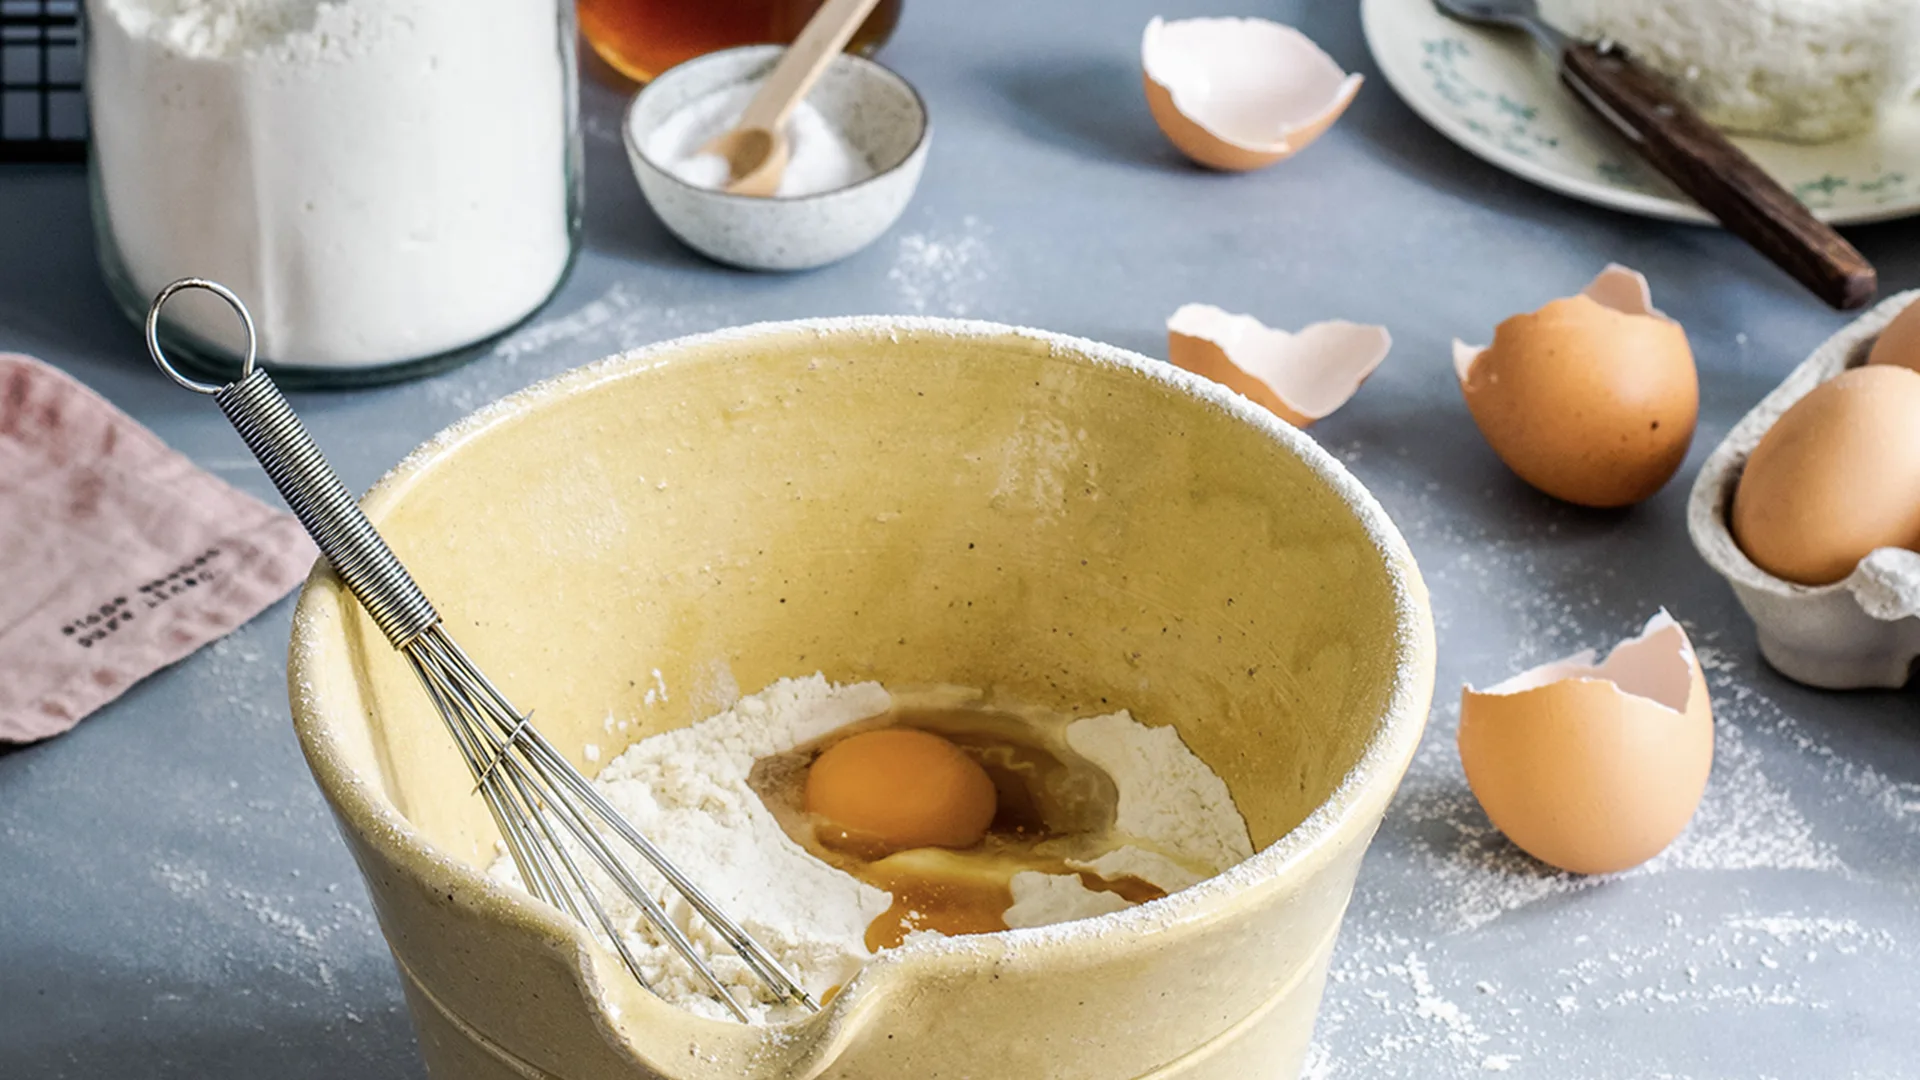 Bowl with ingredients in it, flour and eggshells to the side of it